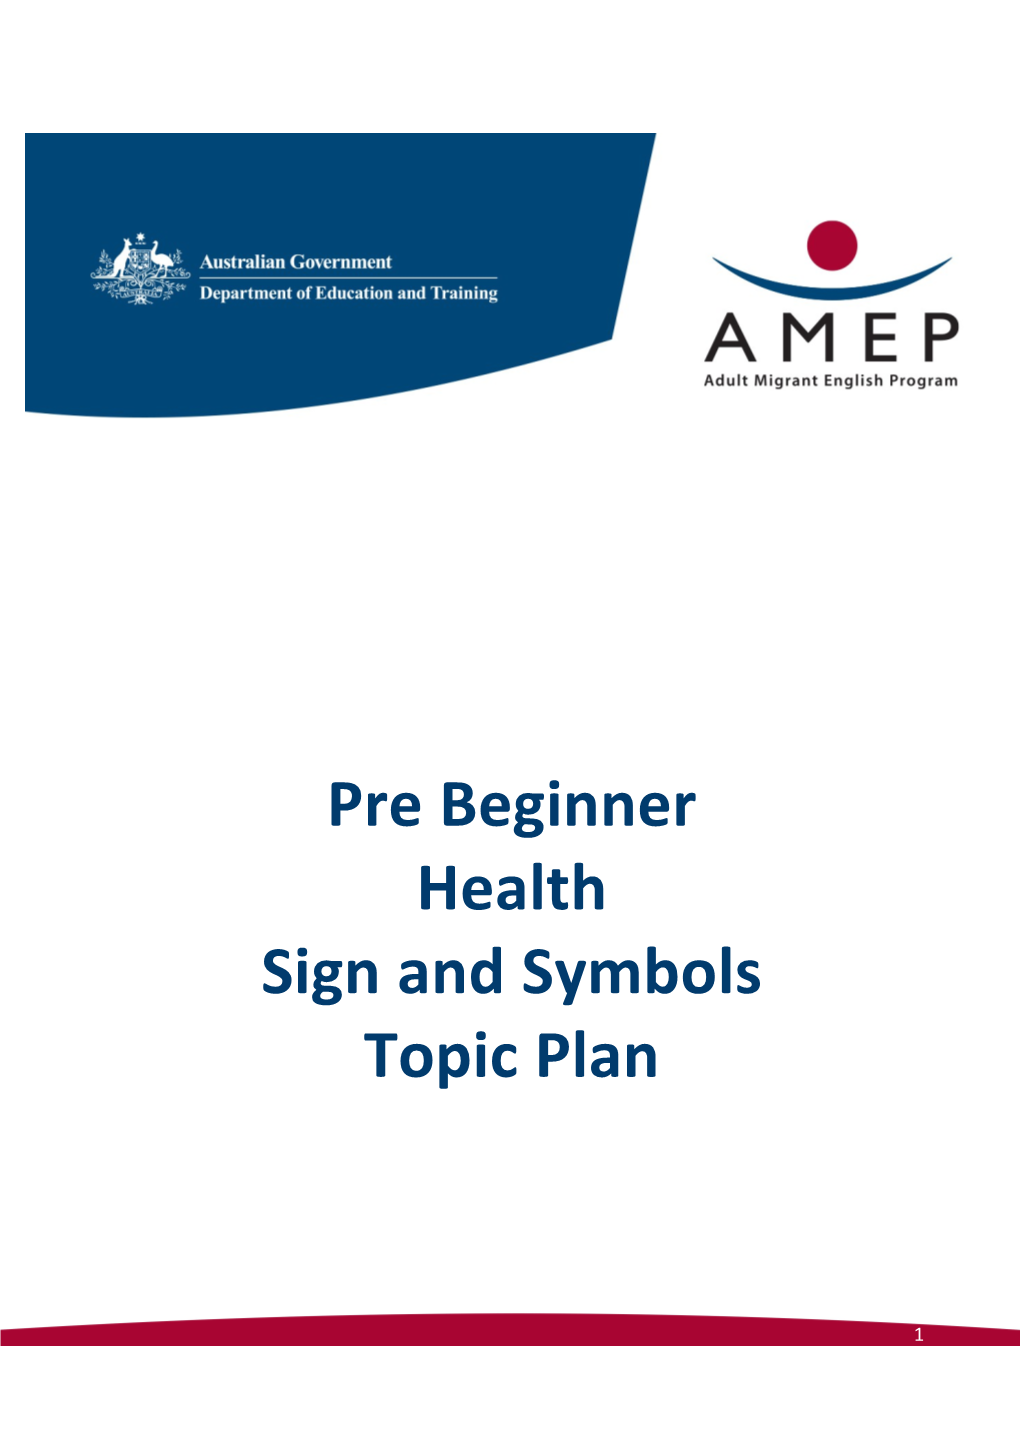 Pre Beginner Health Sign and Symbols Topic Plan